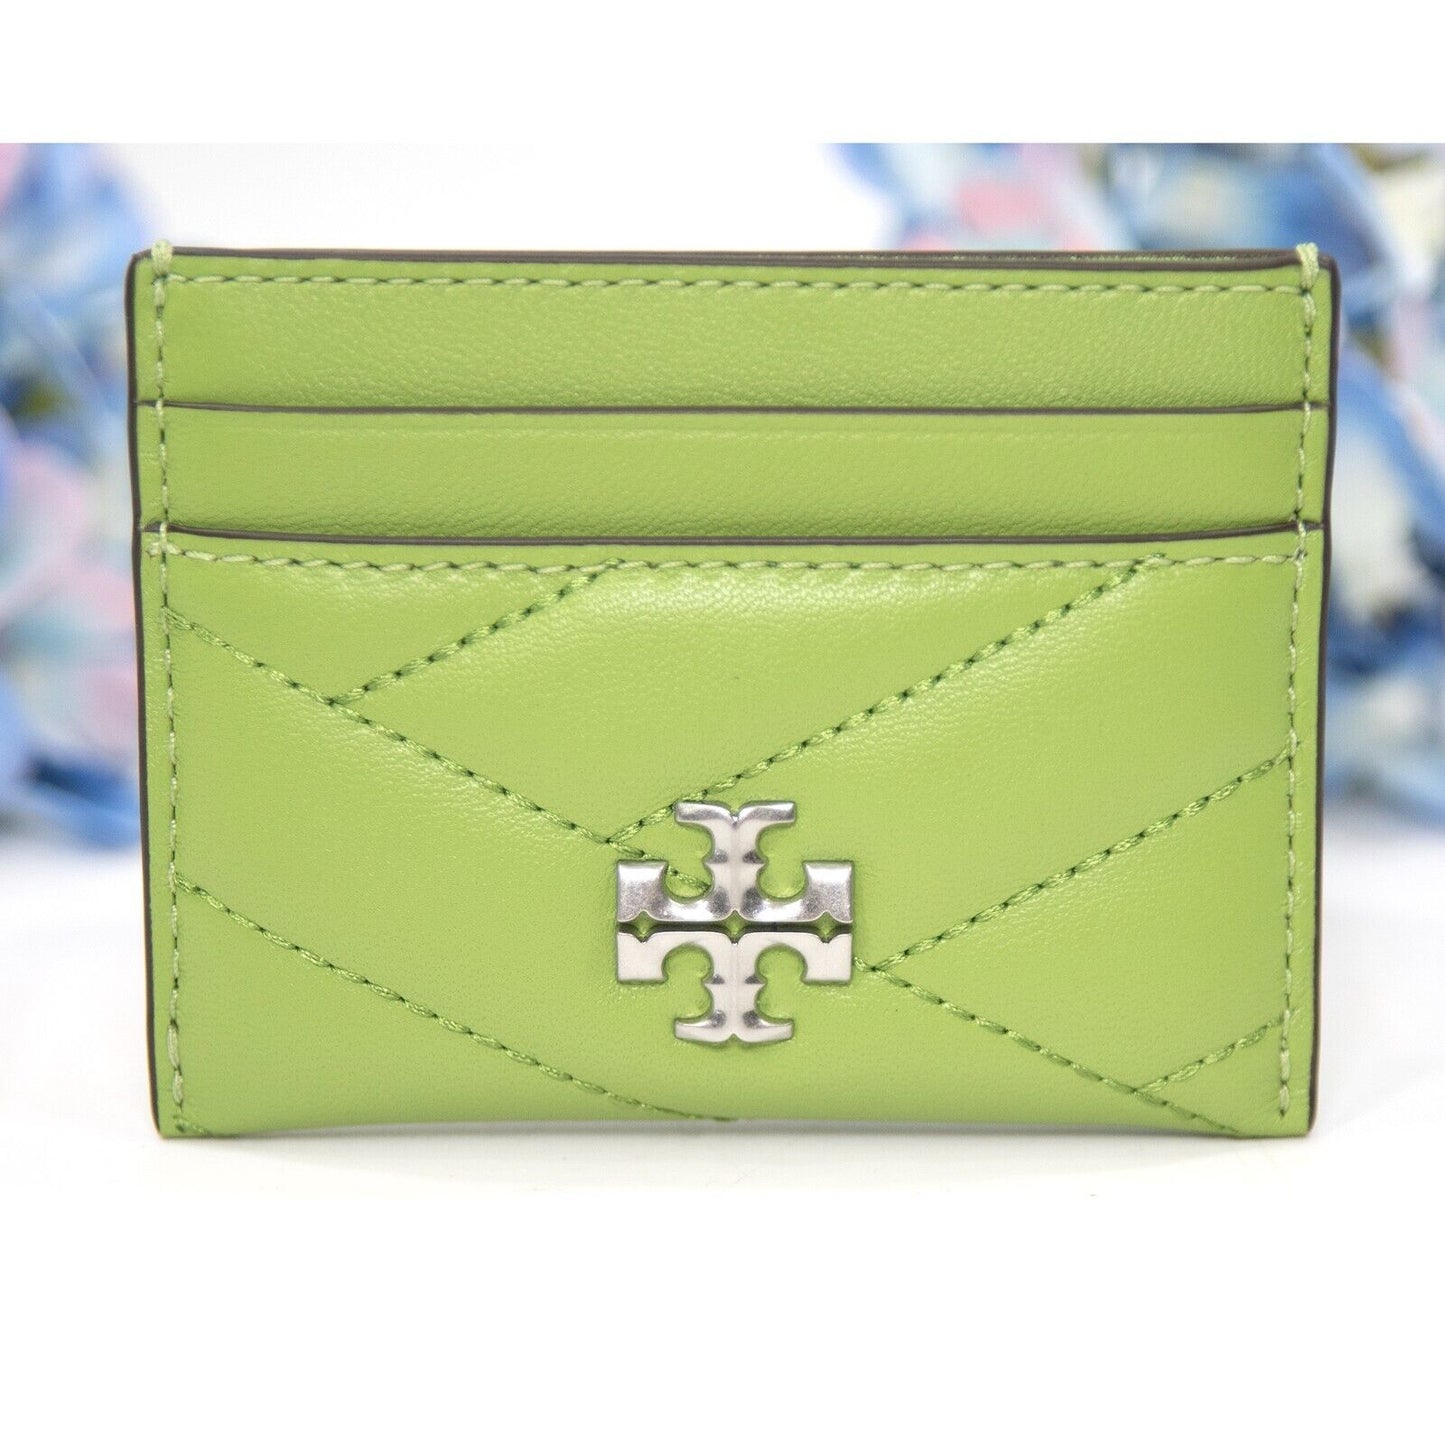 Tory Burch Wild Leaves Green Leather Kira Quilted Logo Card Case Mini Wallet NWT